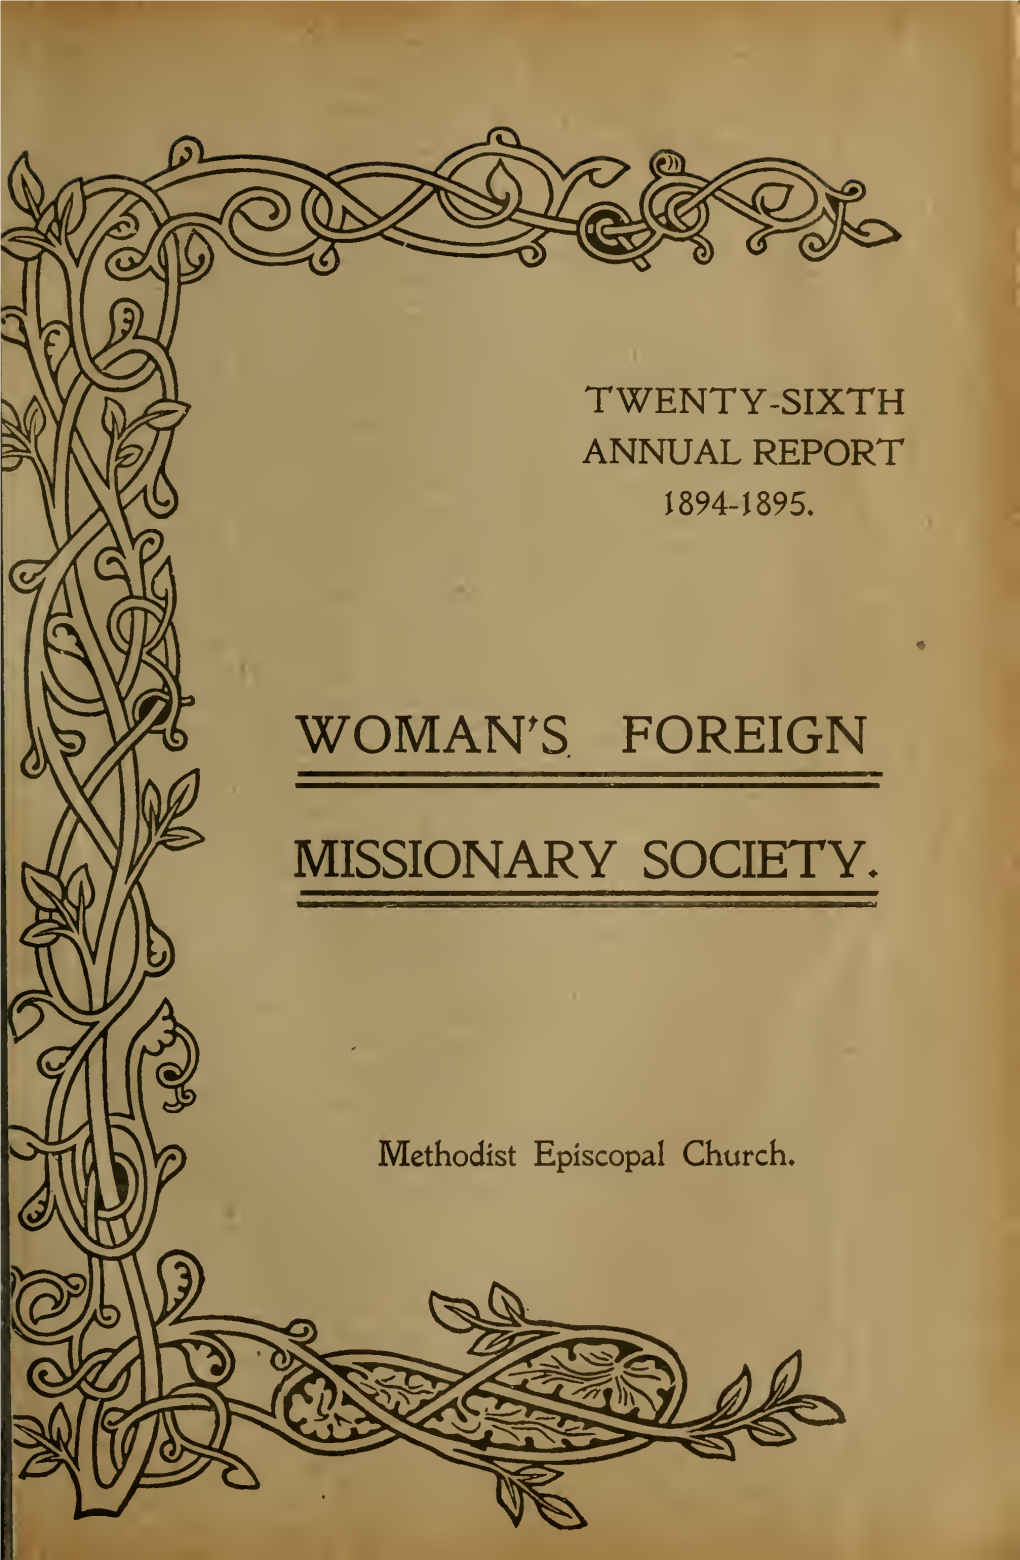 Twenty-Sixth Annual Report of the Woman's Foreign Missionary